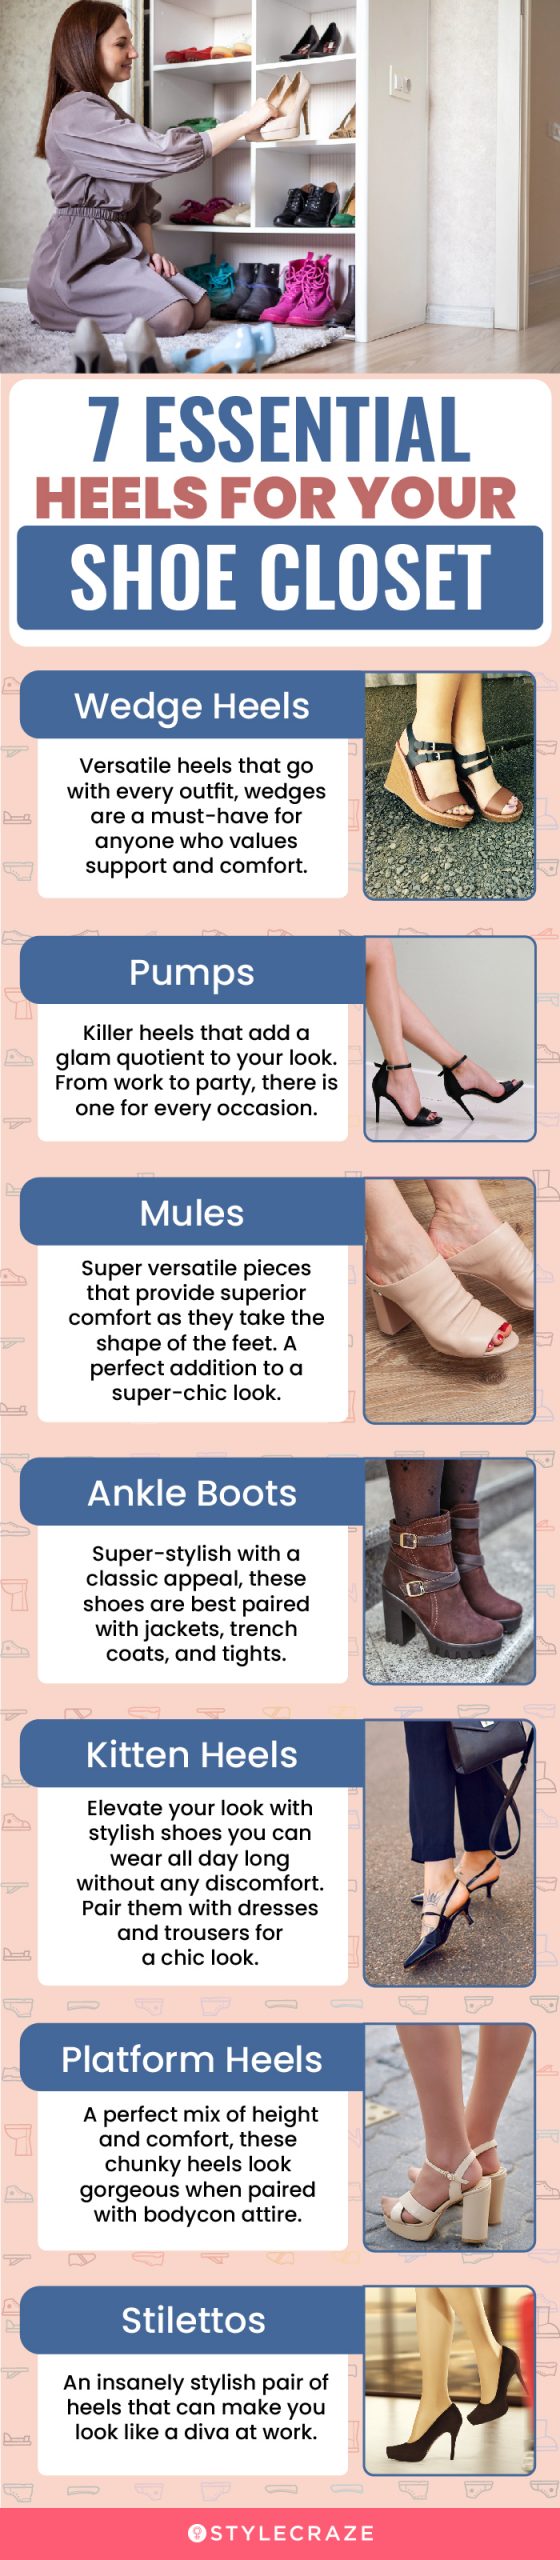 7 essential heels for your shoe closet (infographic)